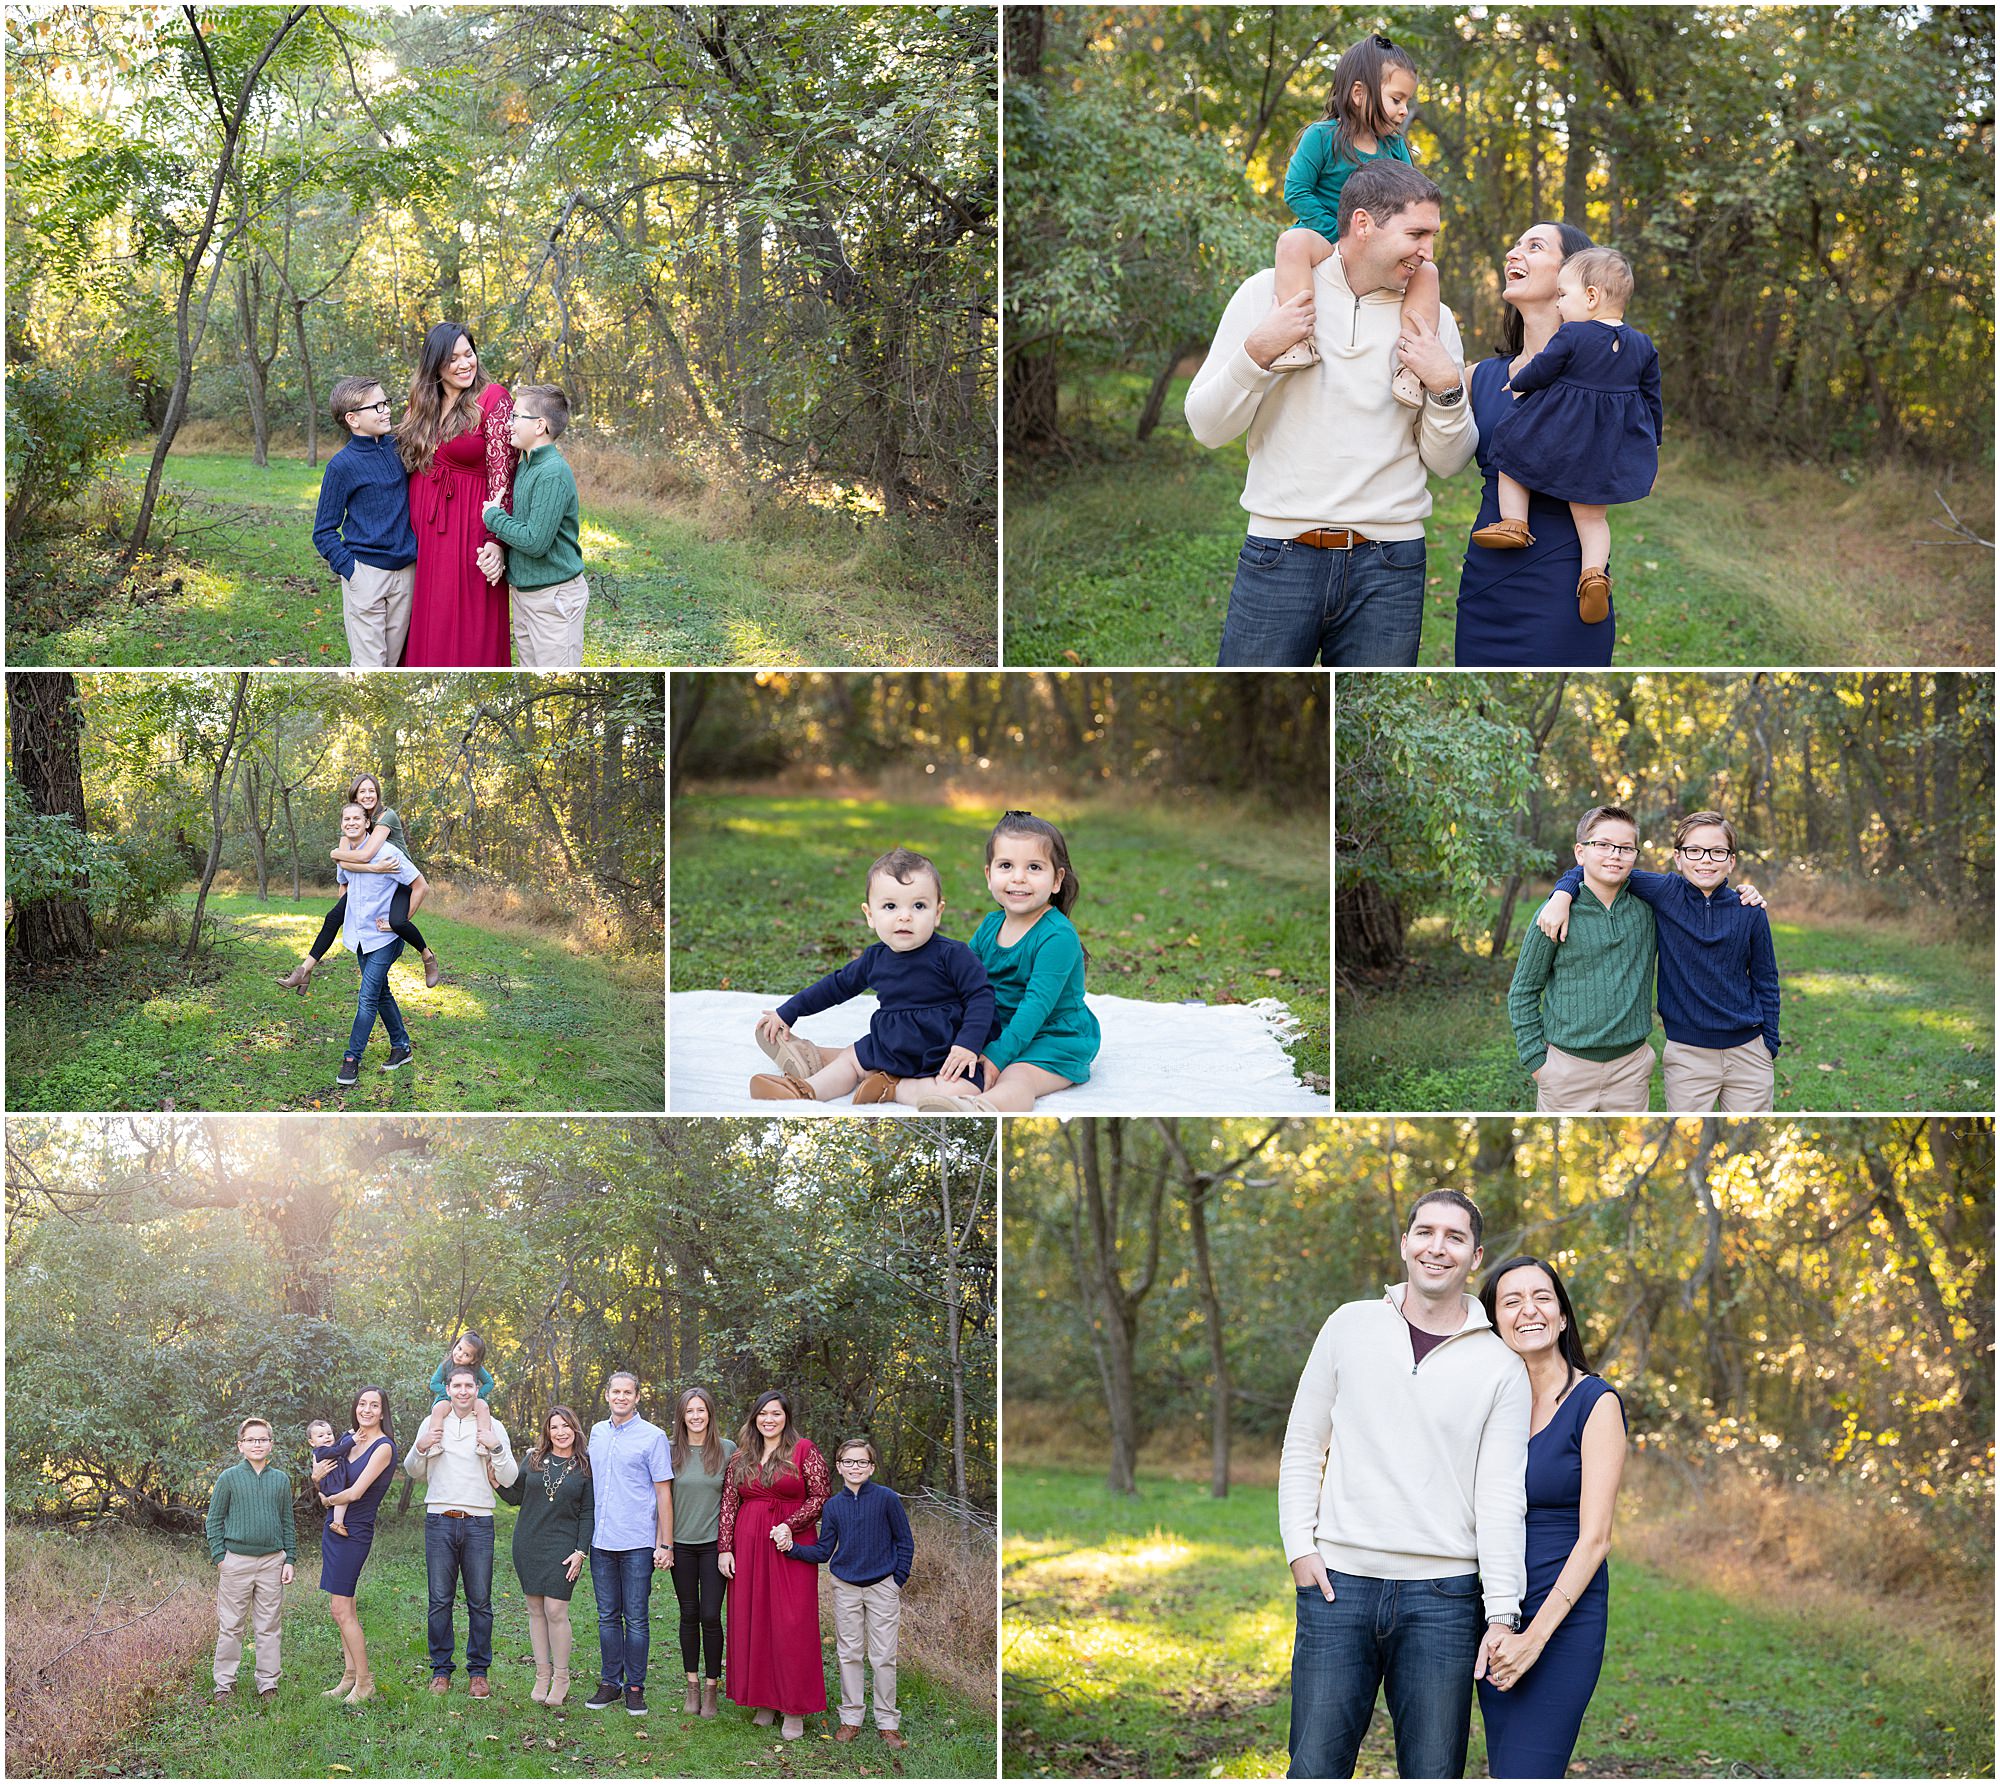 An extended family session at a South Jersey holiday family photo session photographed by Susan Hennessey Photography